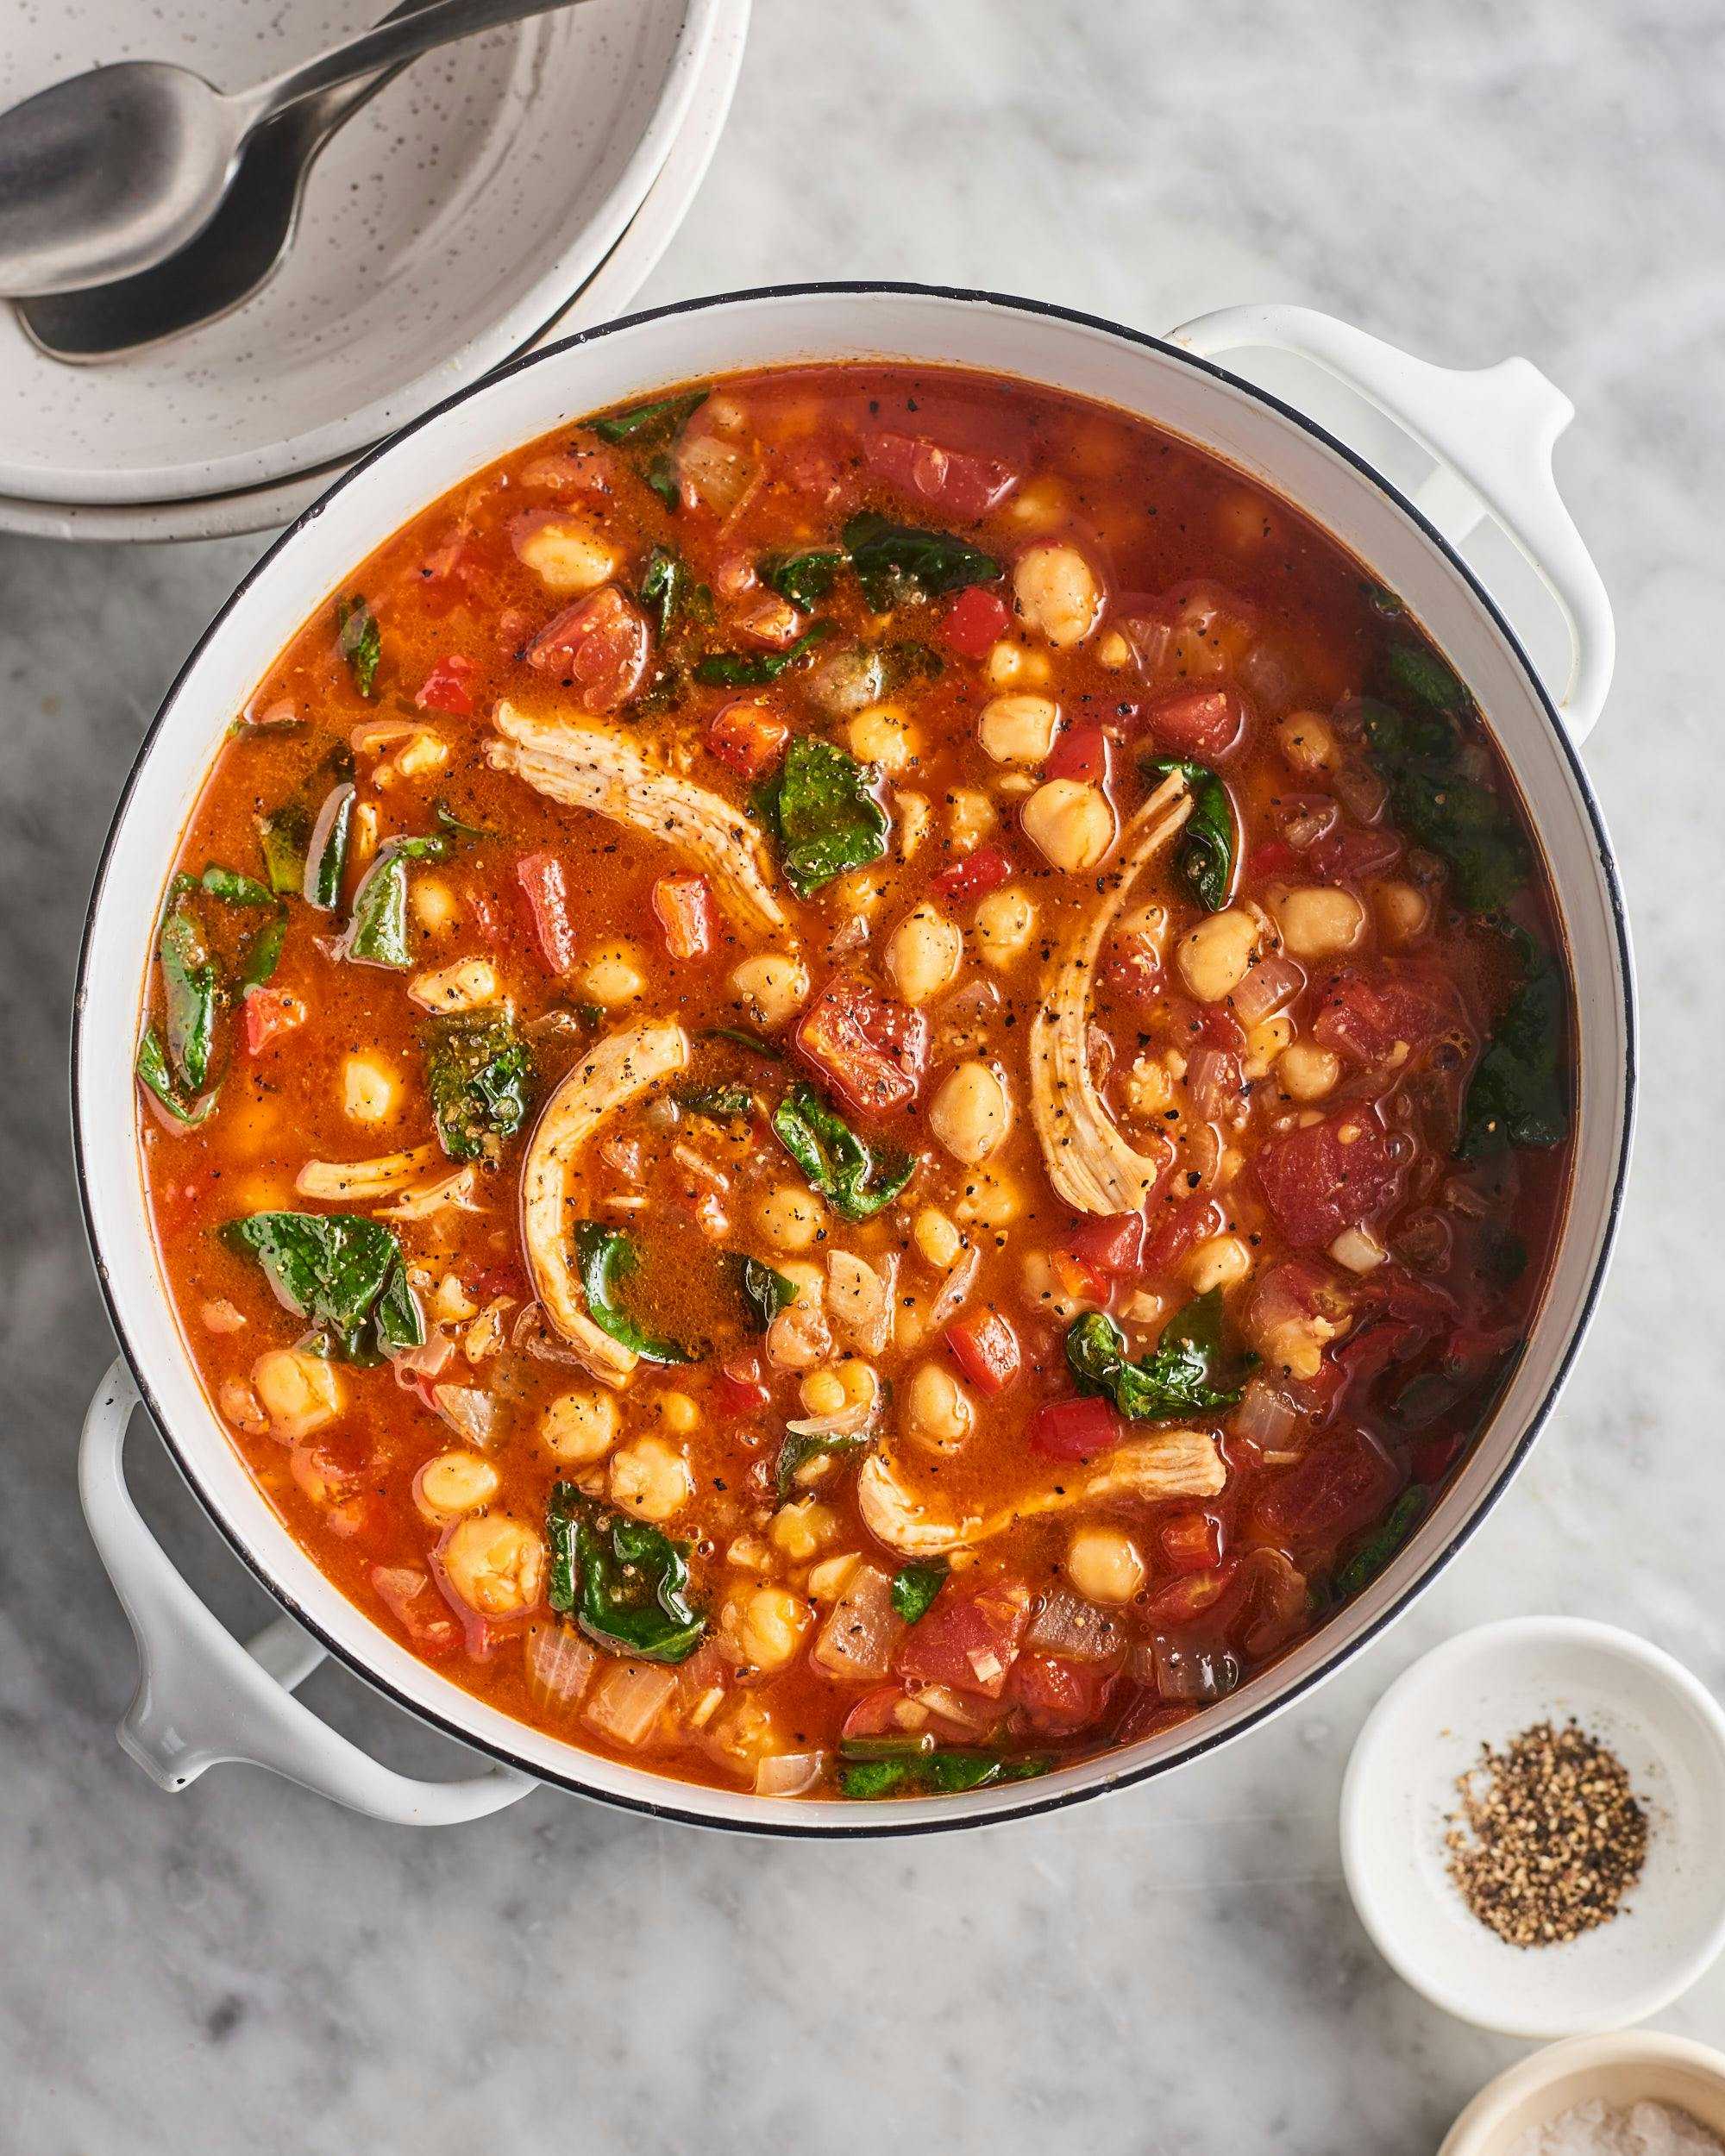 Simple Chickpea Soup From The Mediterranean